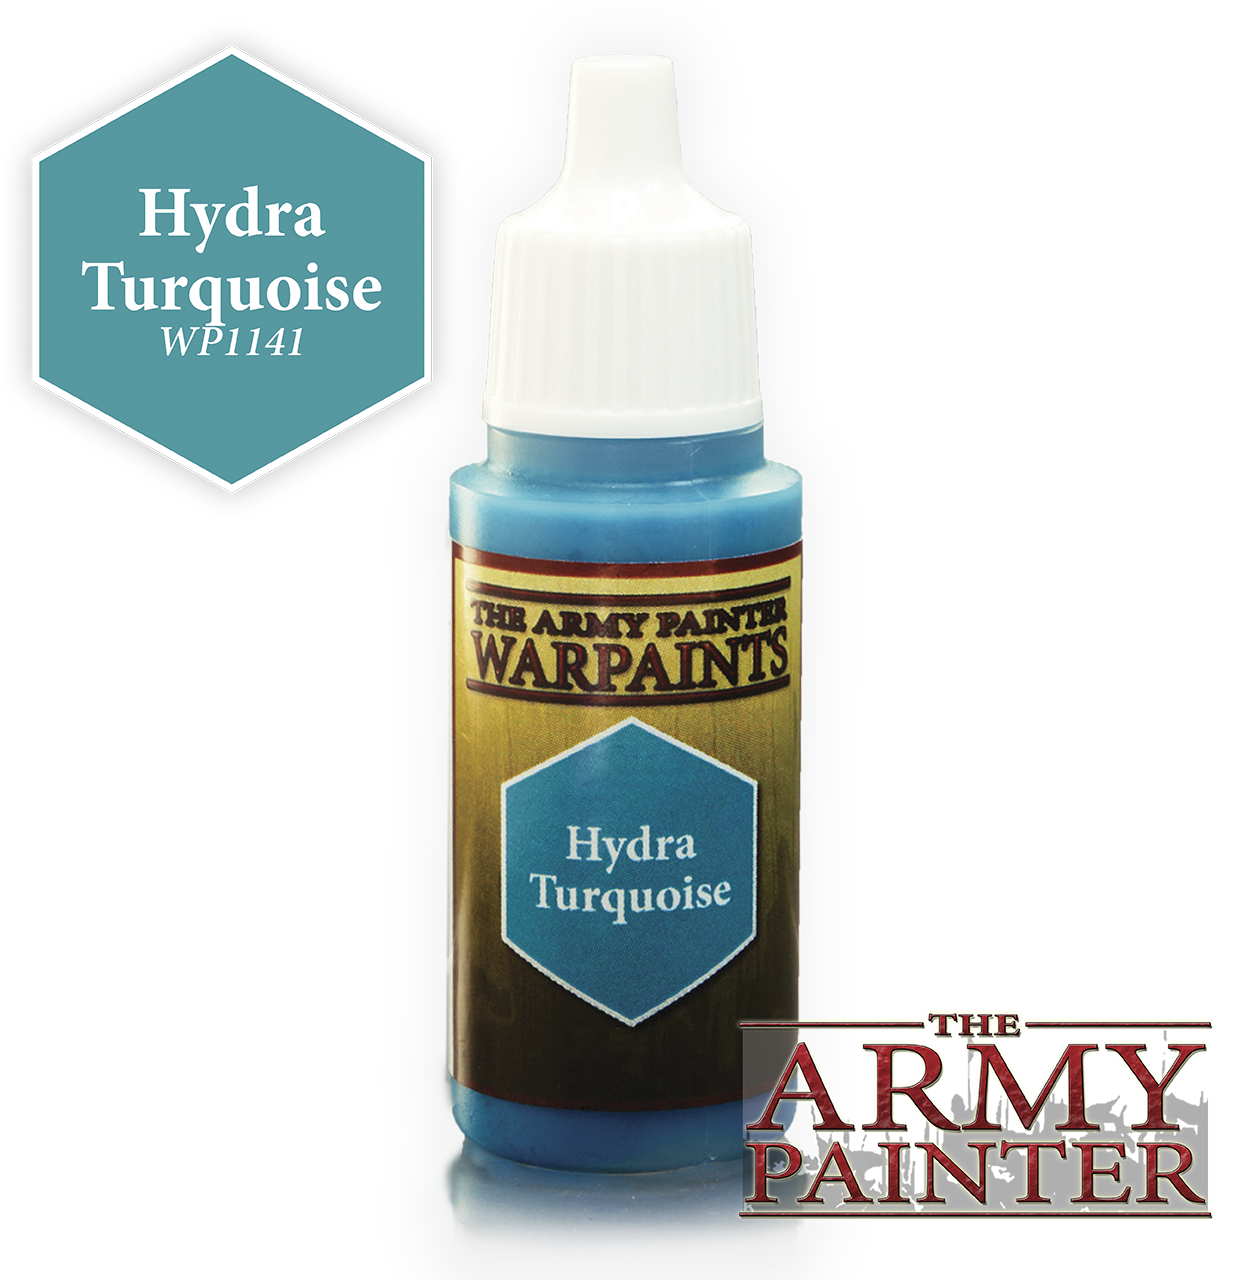 The ARMY PAINTER: Acrylics Warpaint - Hydra Turquoise | Tacoma Games